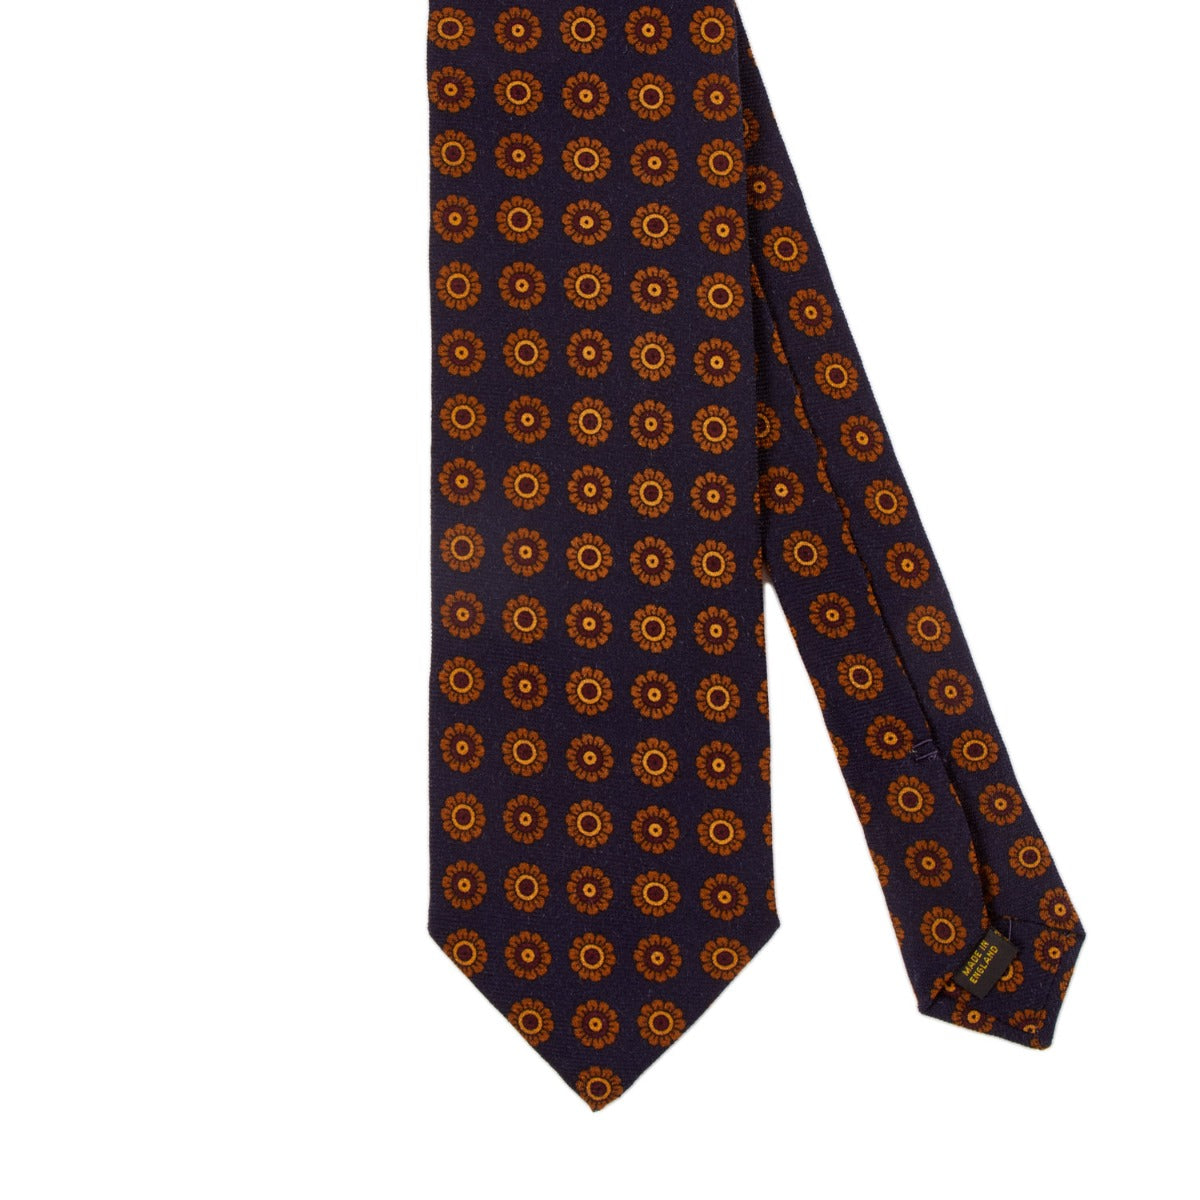 A handmade KirbyAllison.com ties with orange and blue circles on it, named Sovereign Grade Navy Daisy Wool Challis Tie.